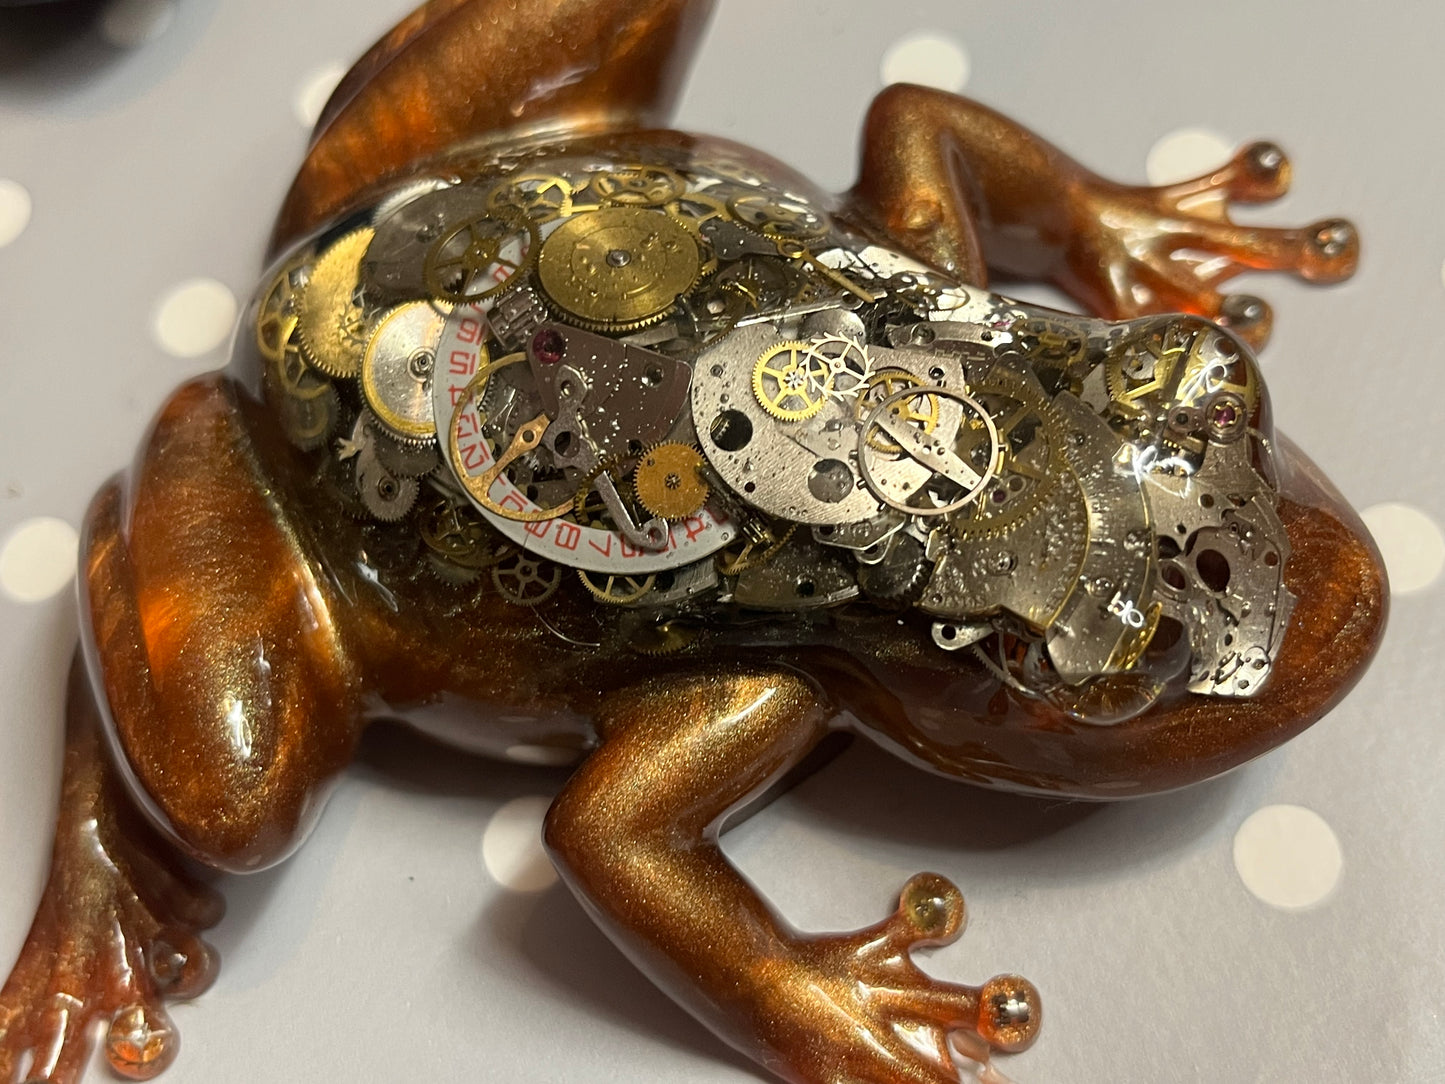 Steampunk Frog - From the Limited Edition handmade Big Weird Frog range